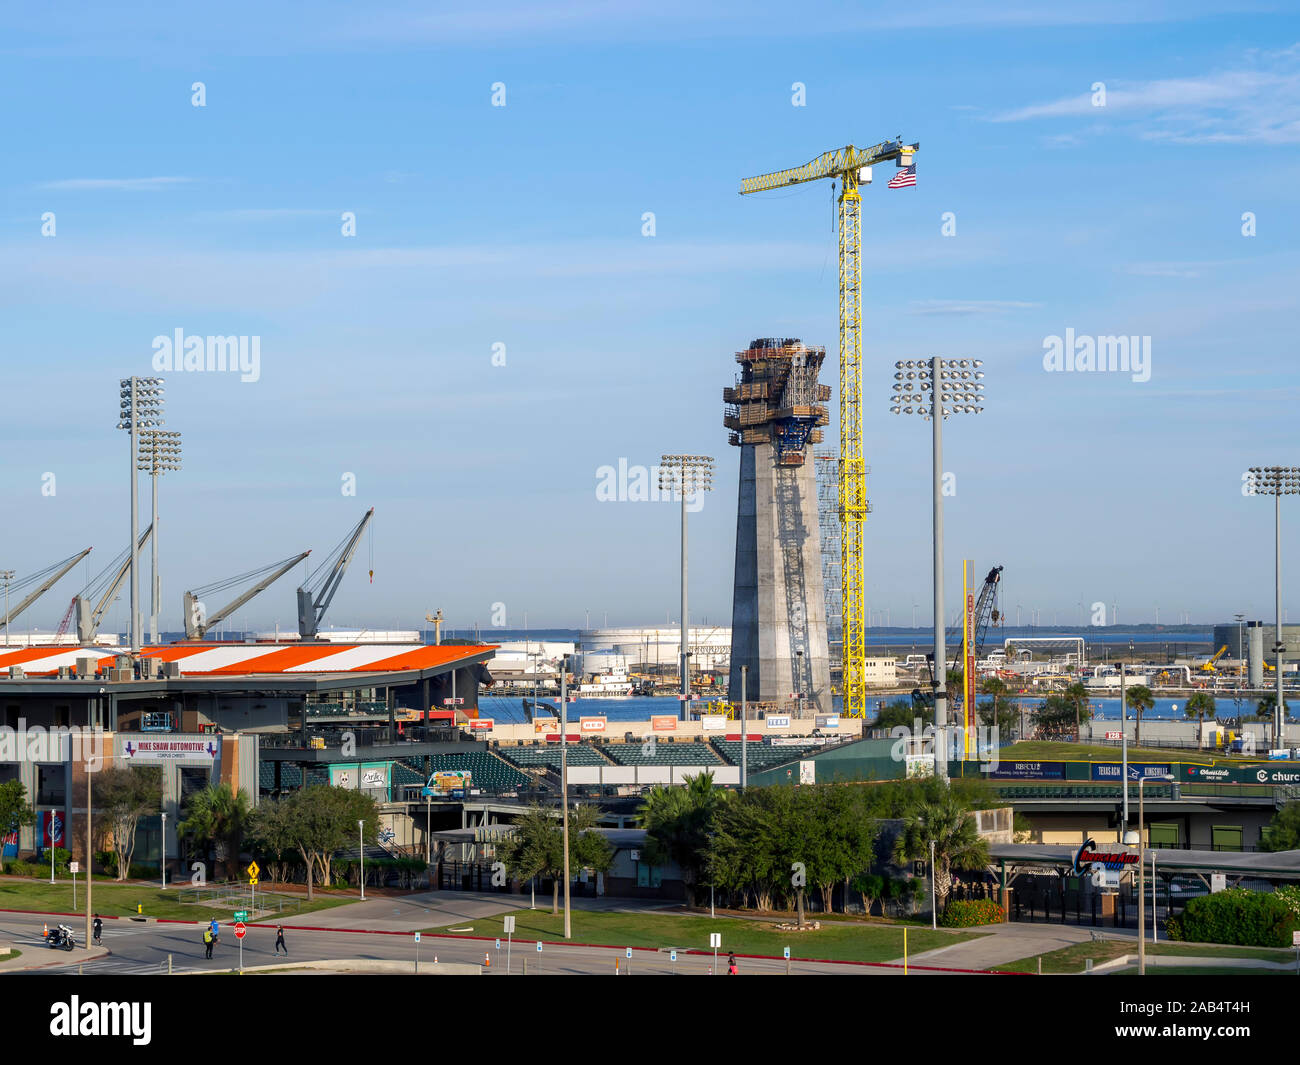 Elevated view the Whataburger Field baseball venue in Corpus Christi, Texas USA with New Harbor Bridge support column under construction in background. Stock Photo